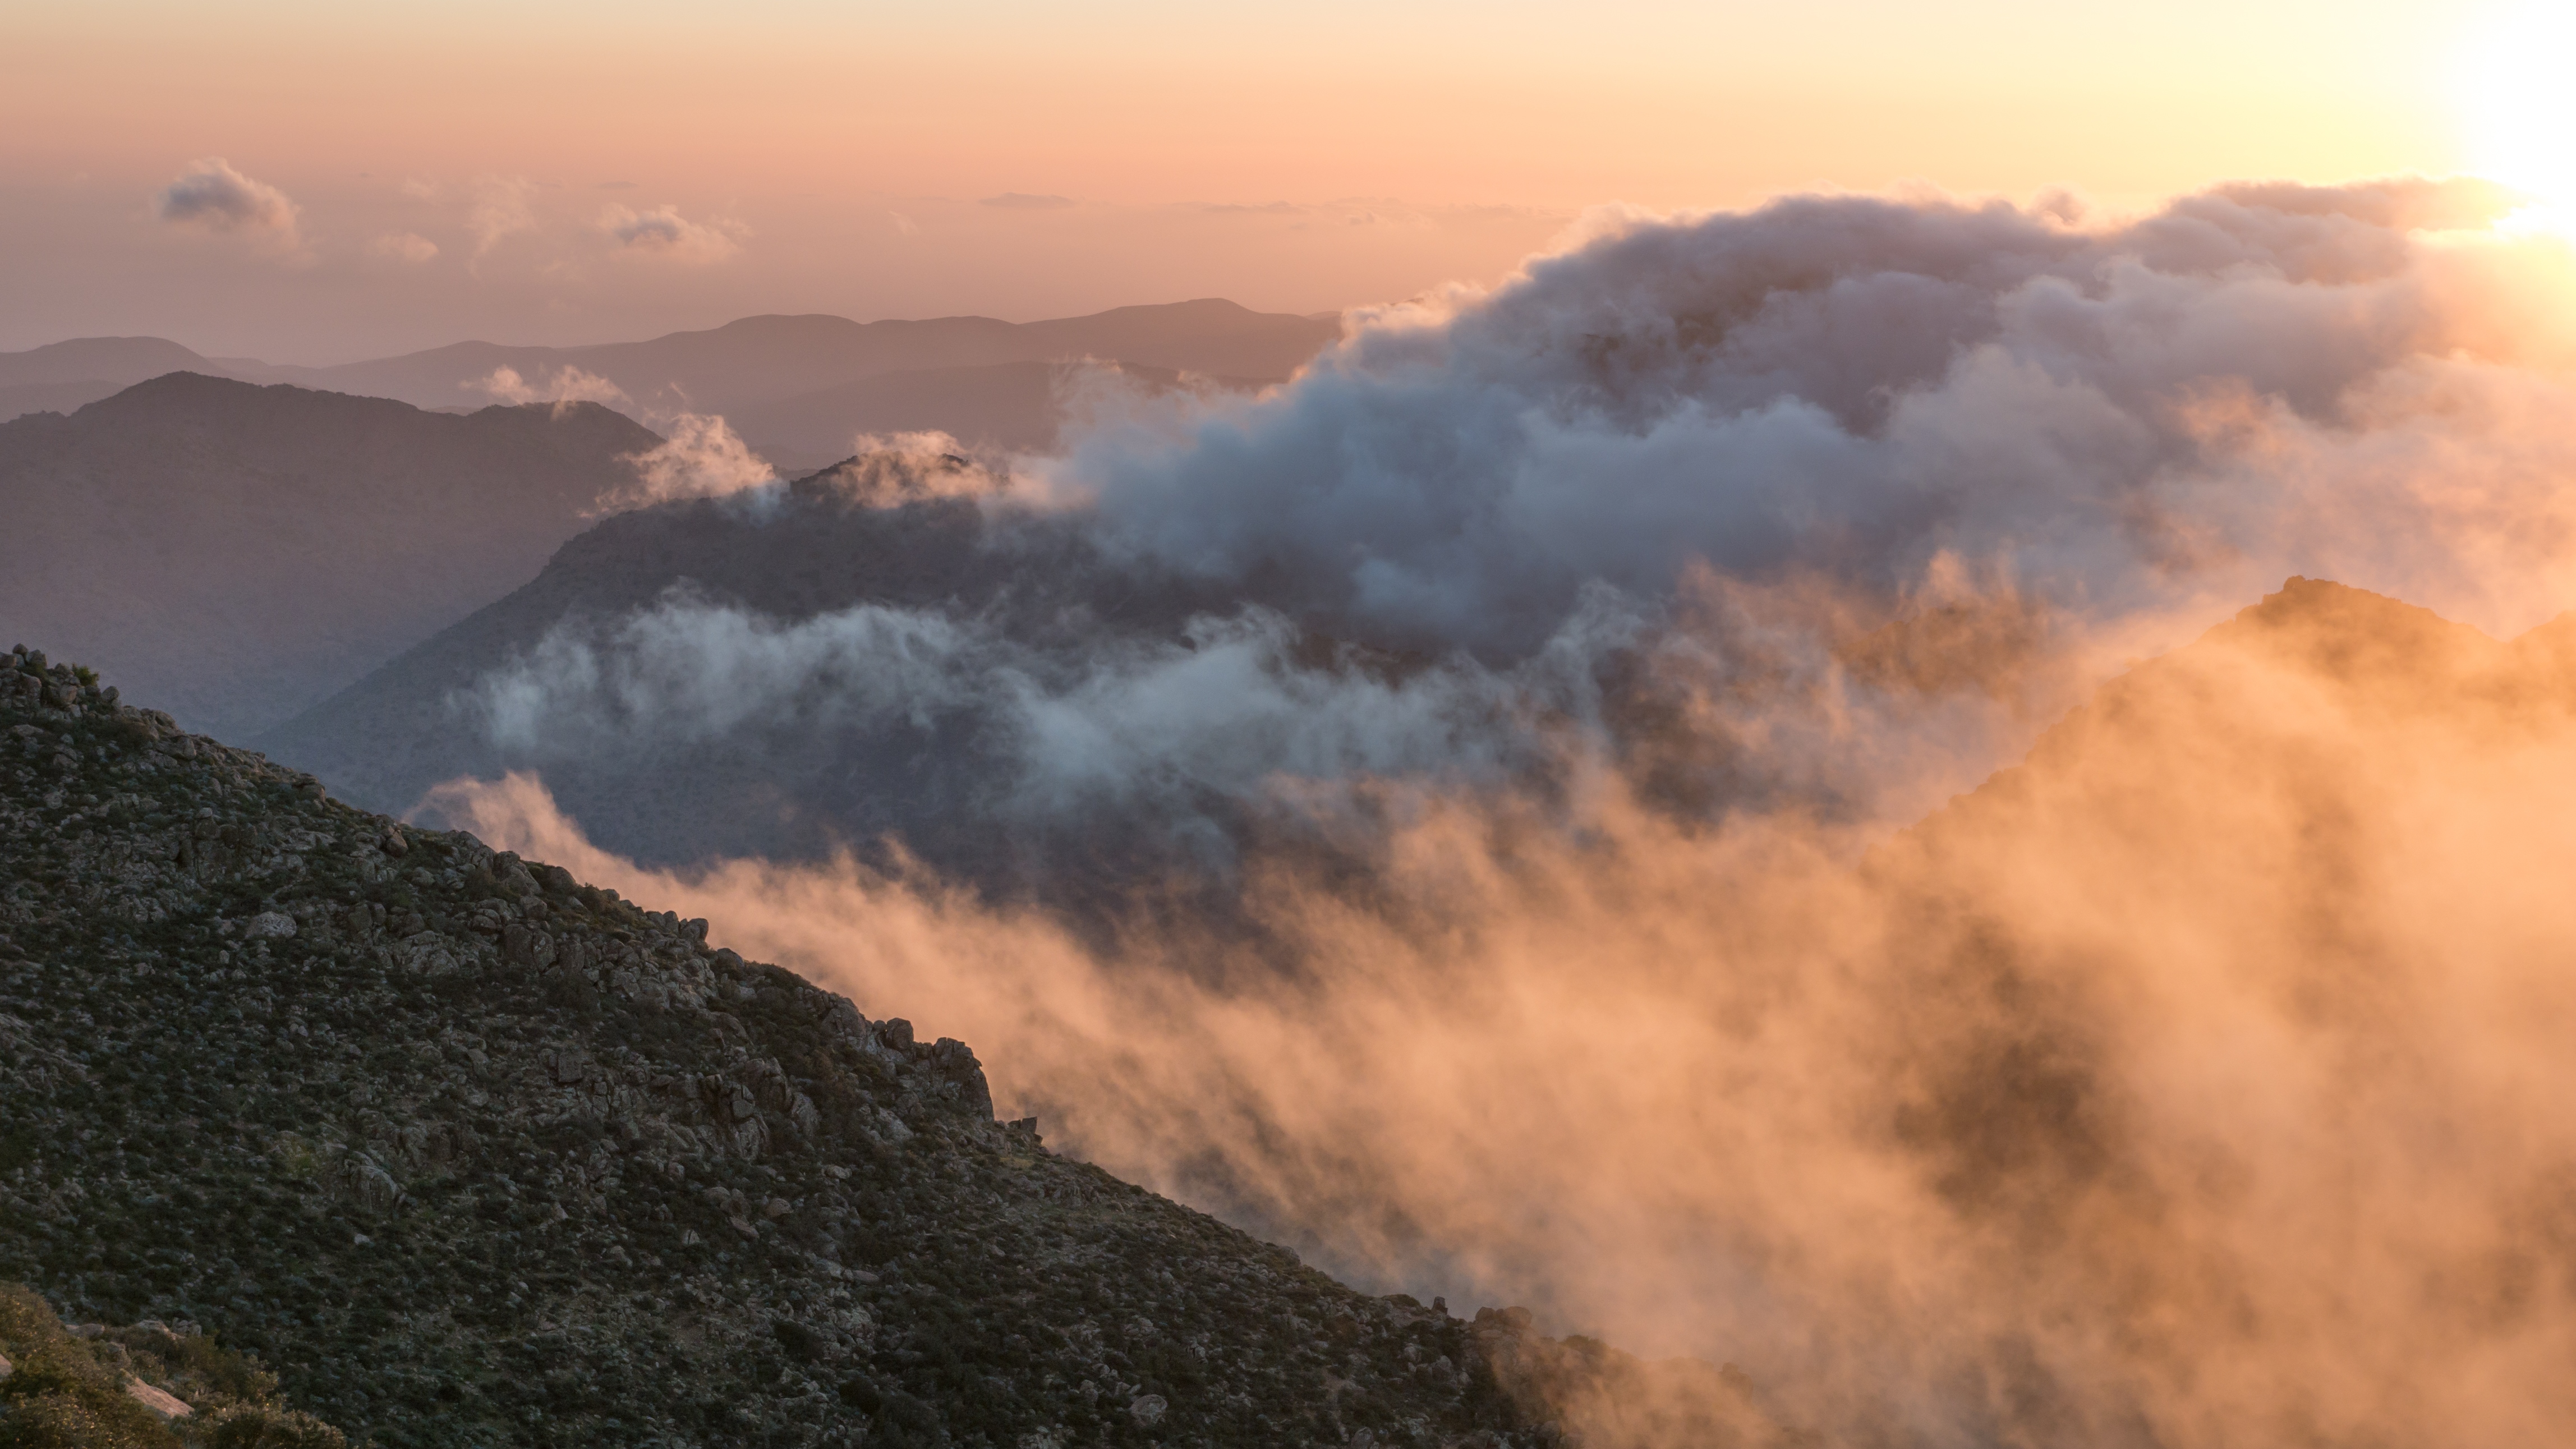 1/17:During the foggy season from December to June, thick fogs regularly form above the Anti-Atlas Mountains in Morocco.